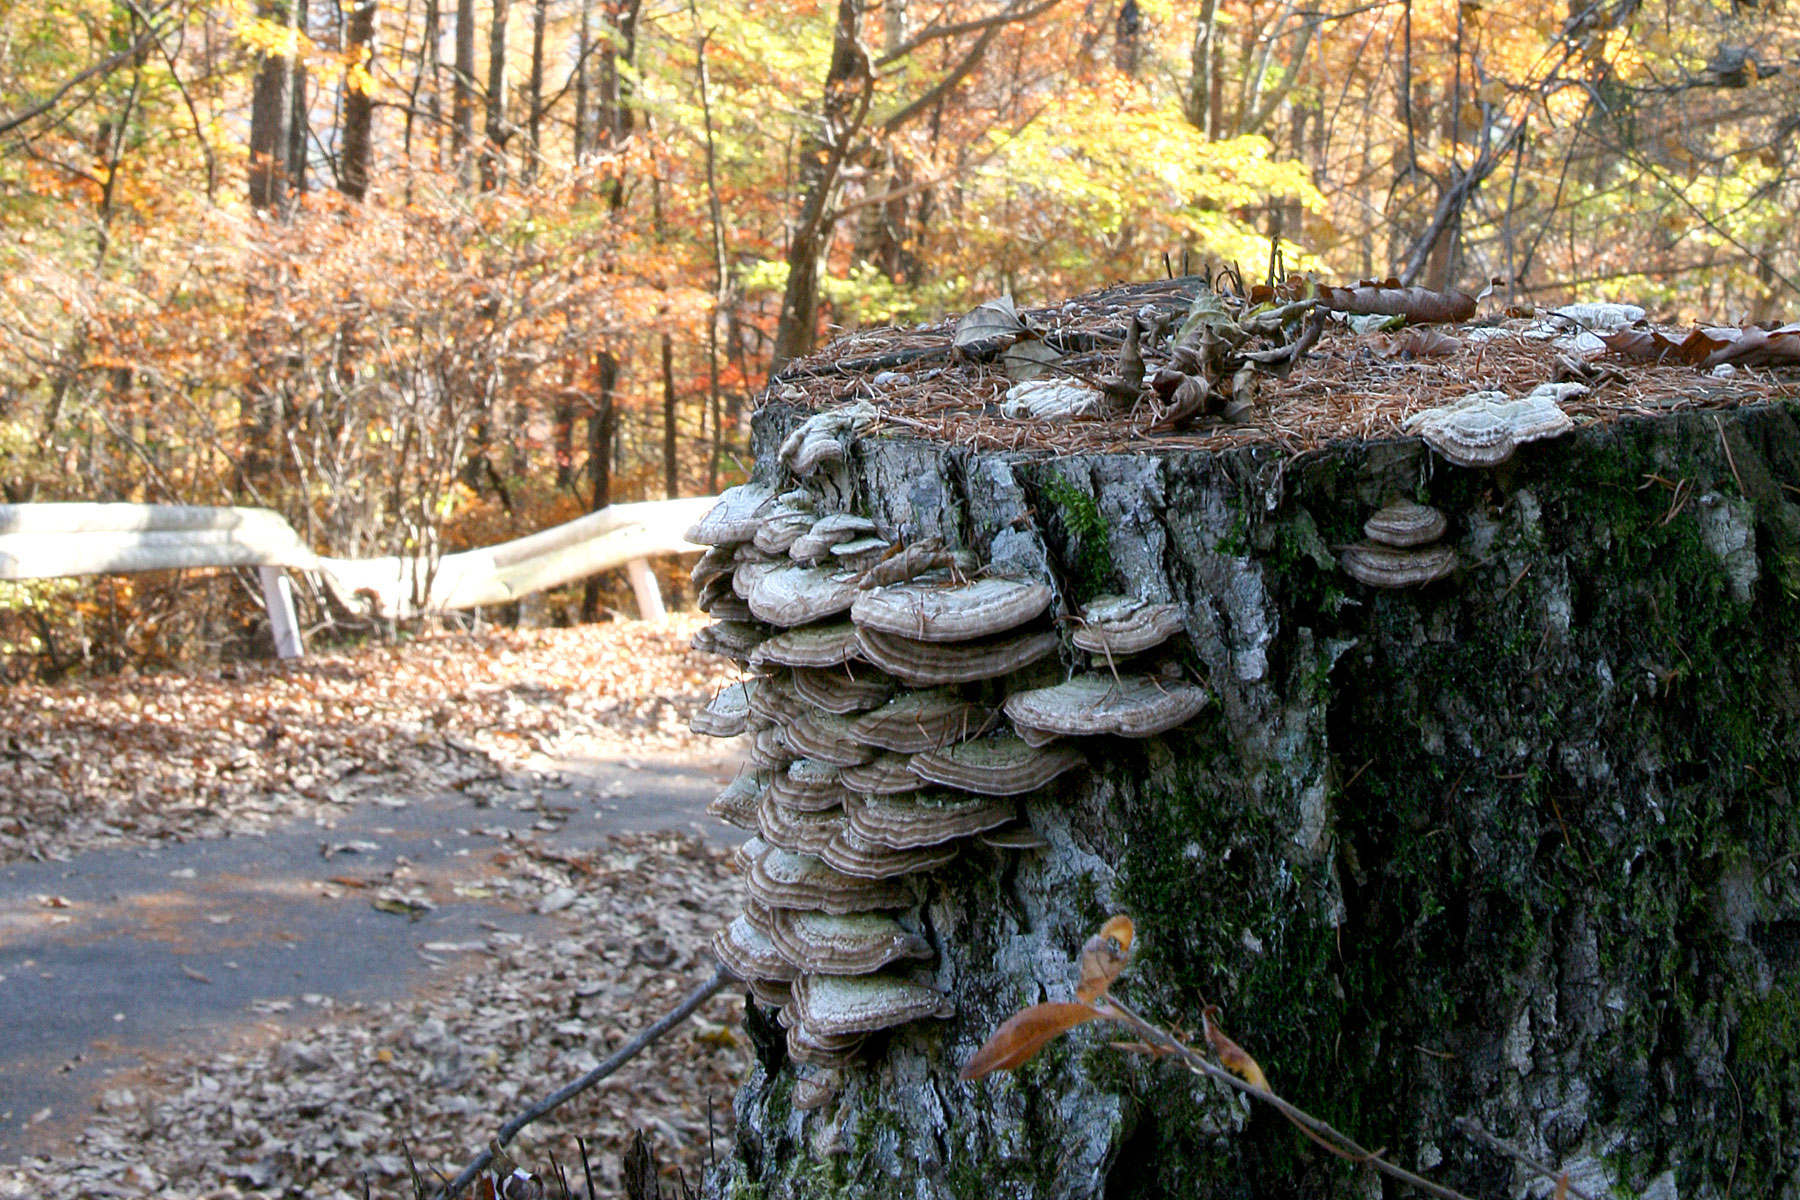 a tree stump in the woods has a large group of mushrooms growing on it